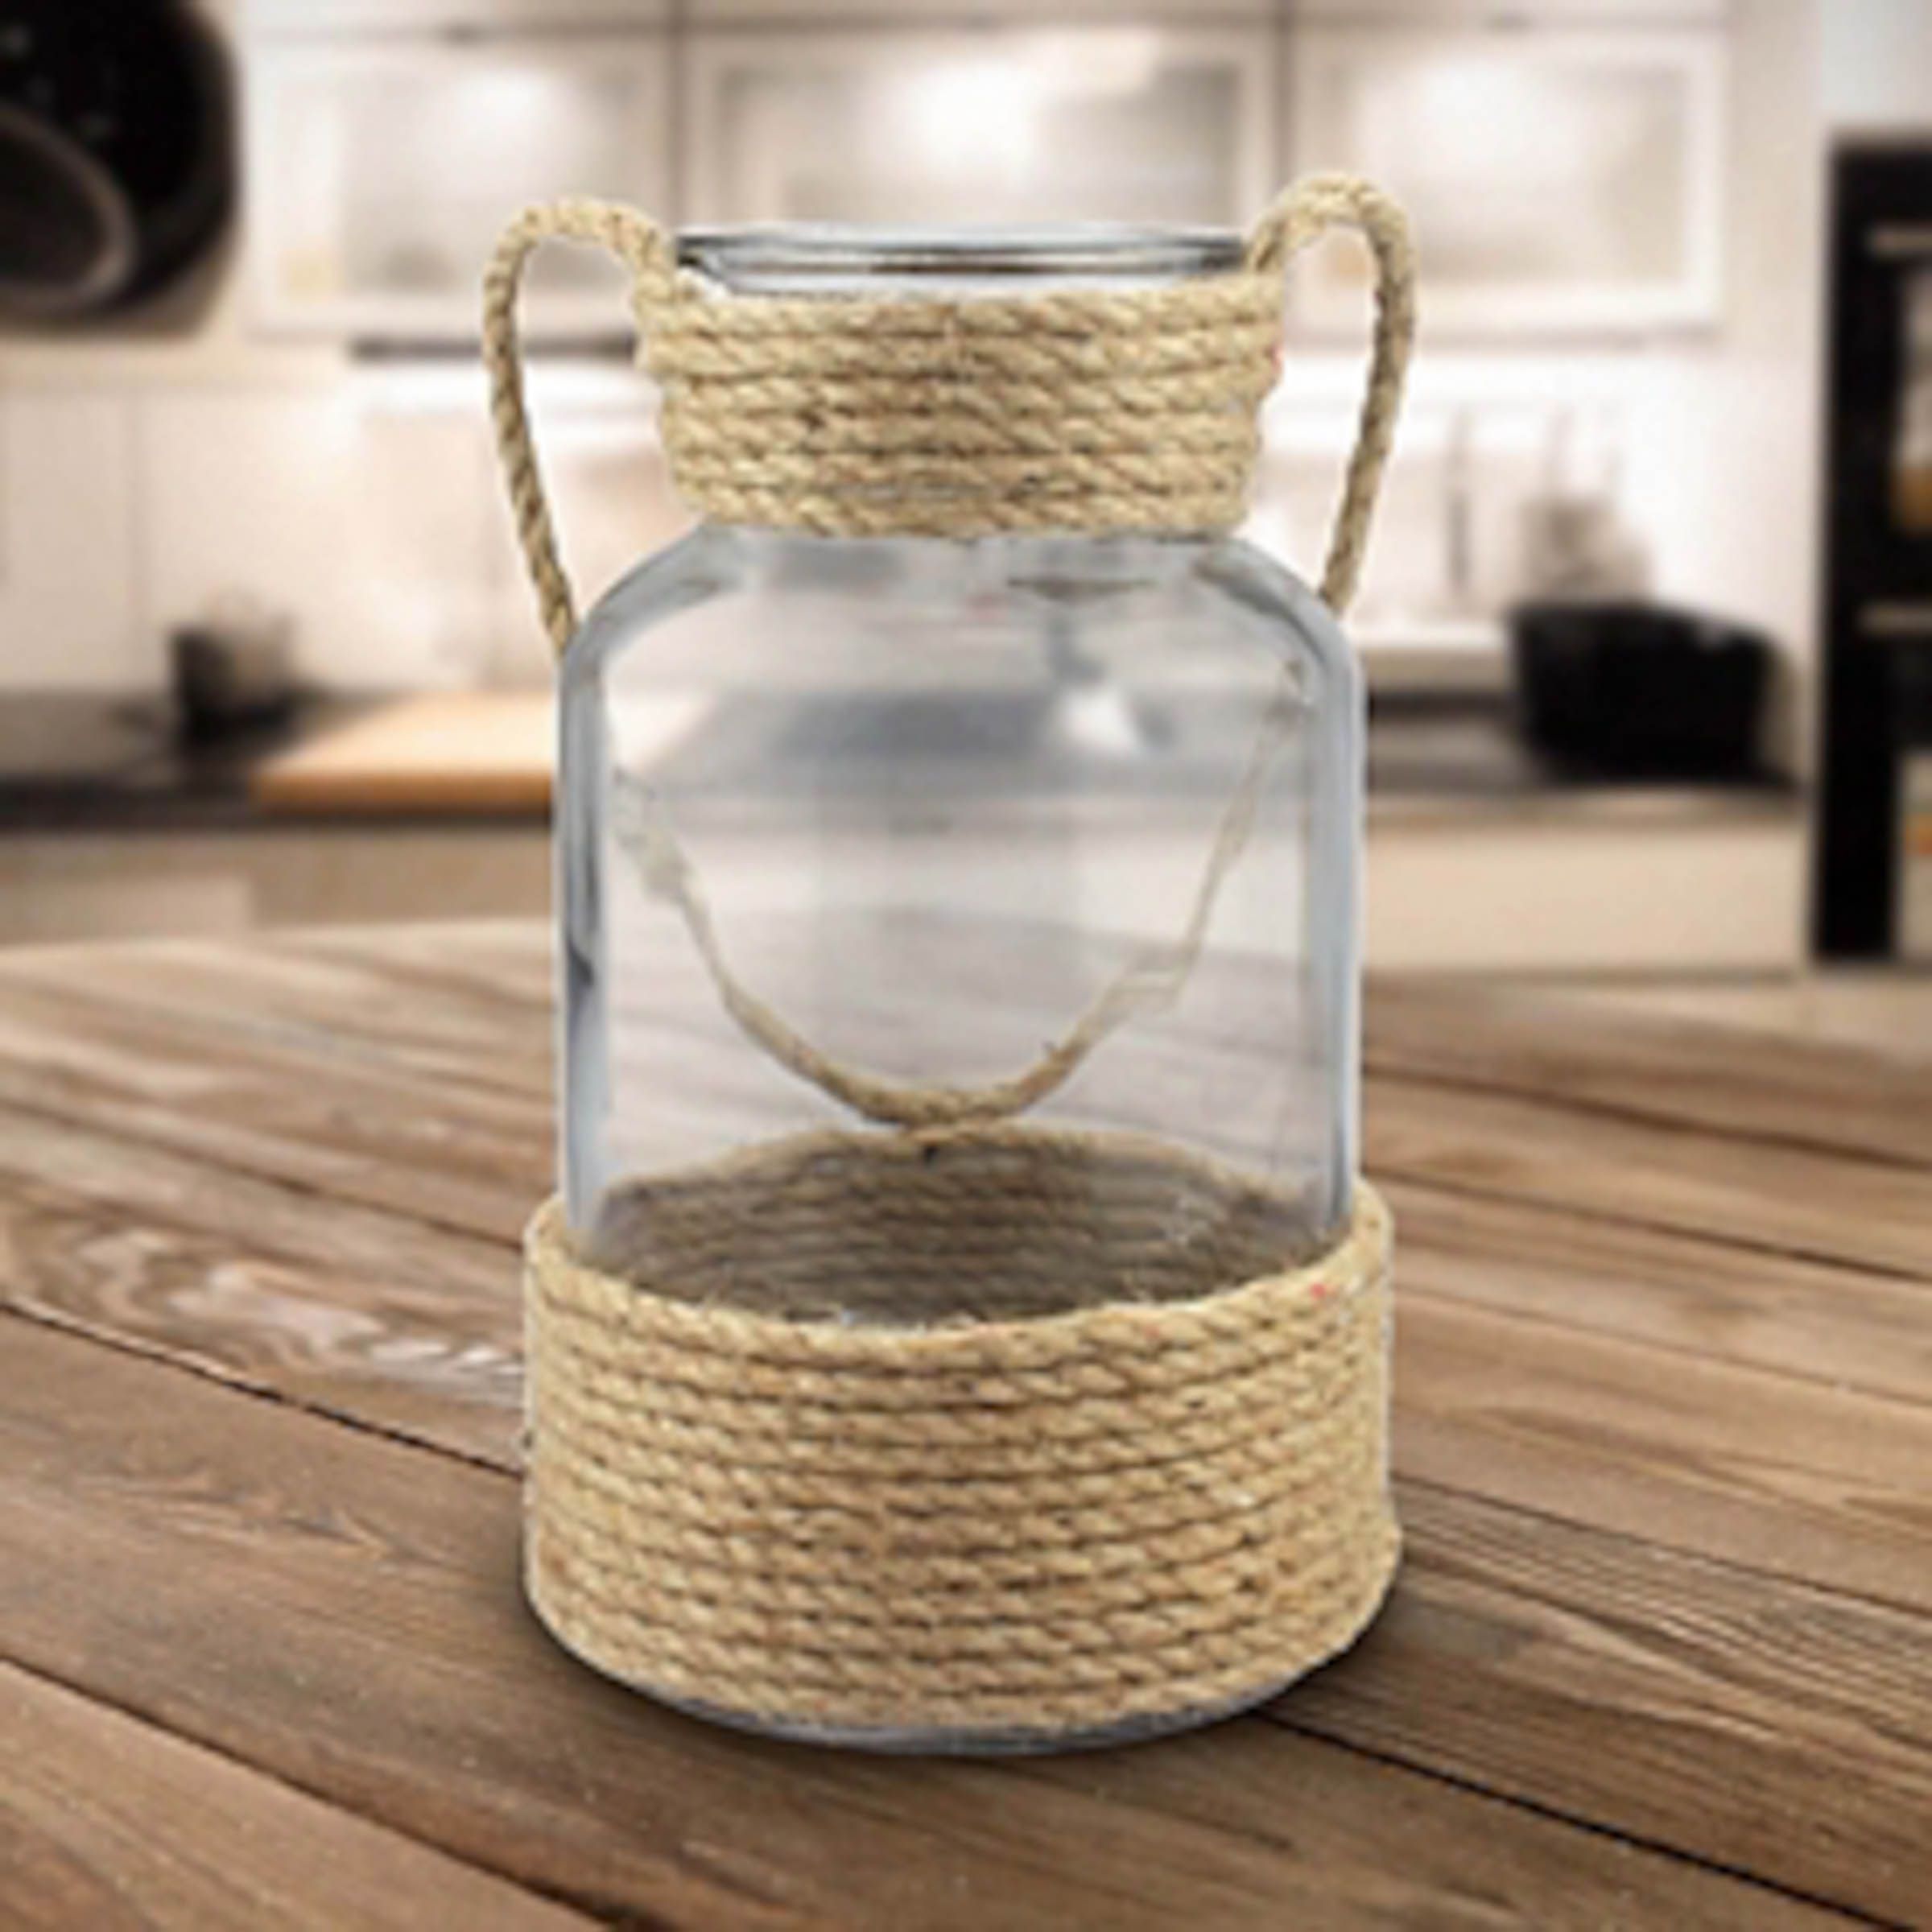 DIY Dollar Tree Rope Vase - A Nautical DIY you are sure to love! - Re-Fabbed - DIY Dollar Tree Rope Vase - A Nautical DIY you are sure to love! - Re-Fabbed -   18 diy Dollar Tree vase ideas